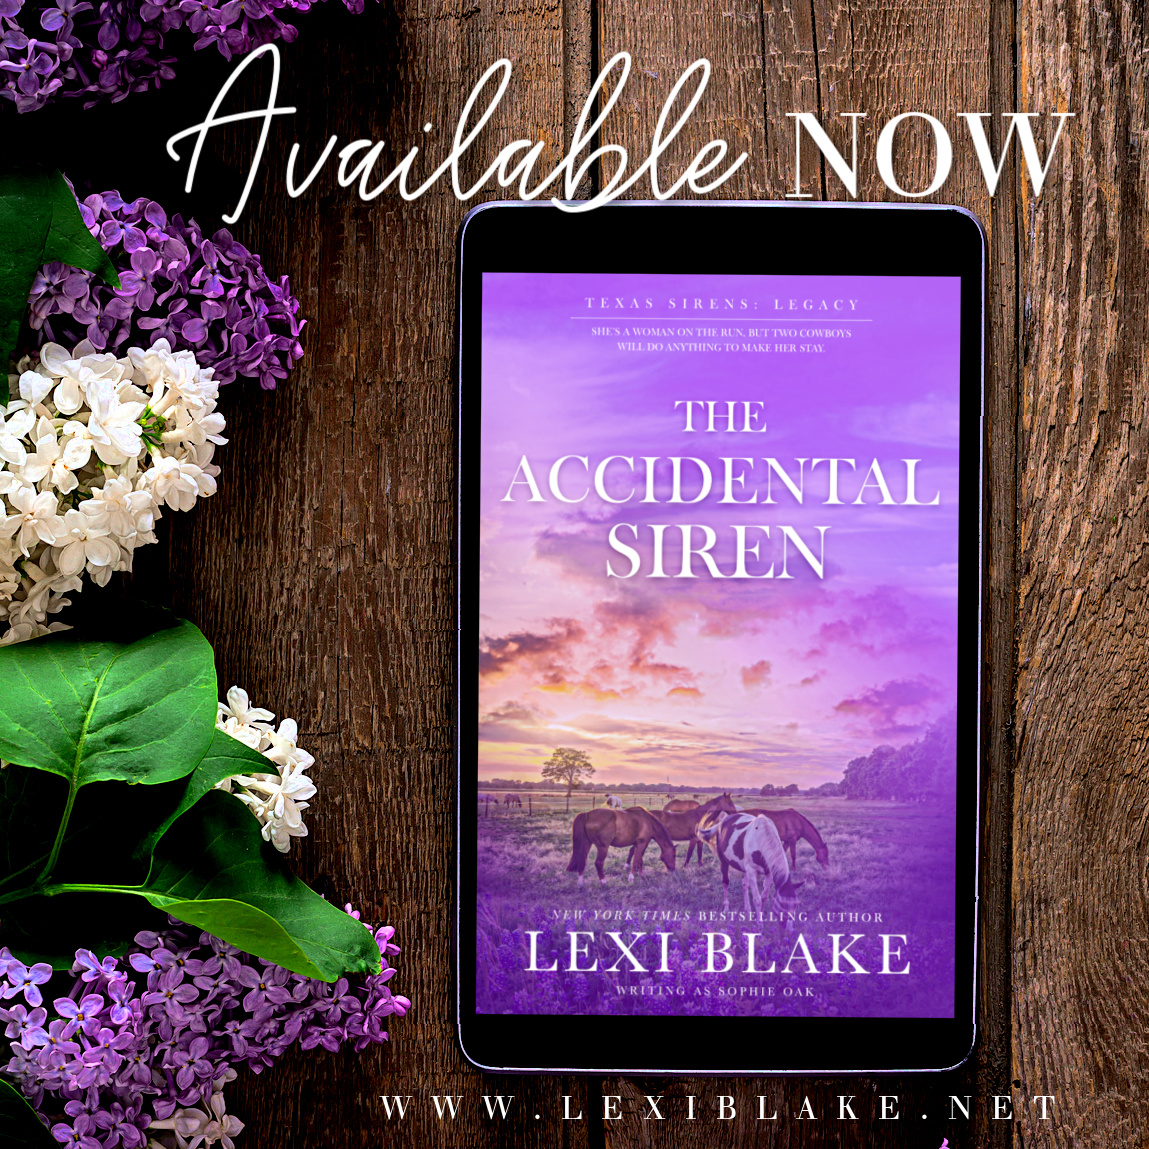 The Accidental Siren by @authorlexiblake is now LIVE! Download today on:- Amazon: amzn.to/3OWRxx0 Apple Books: apple.co/3wsVgMt Nook: bit.ly/49mURcM Kobo: bit.ly/49rNErR Google Play: bit.ly/3UPm9UI @valentine_pr_